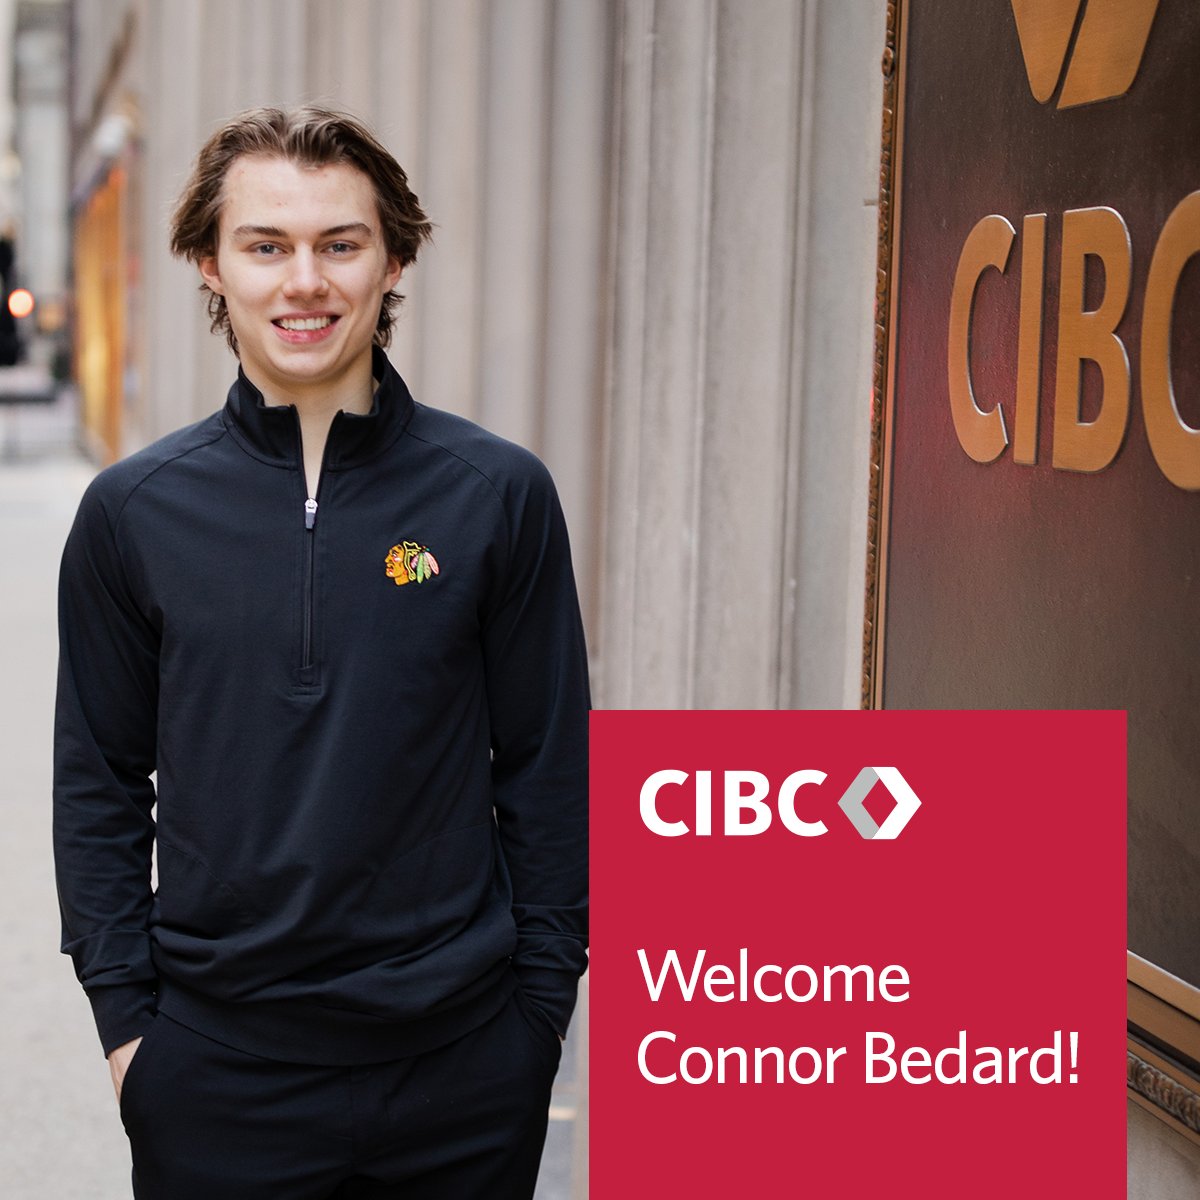 Motivated. Dedicated. Ready. We're excited to team up with the Chicago Blackhawks' Connor Bedard 🏒 as he joins CIBC as an ambassador. We can't wait to see him chase his ambitions on and off the ice.